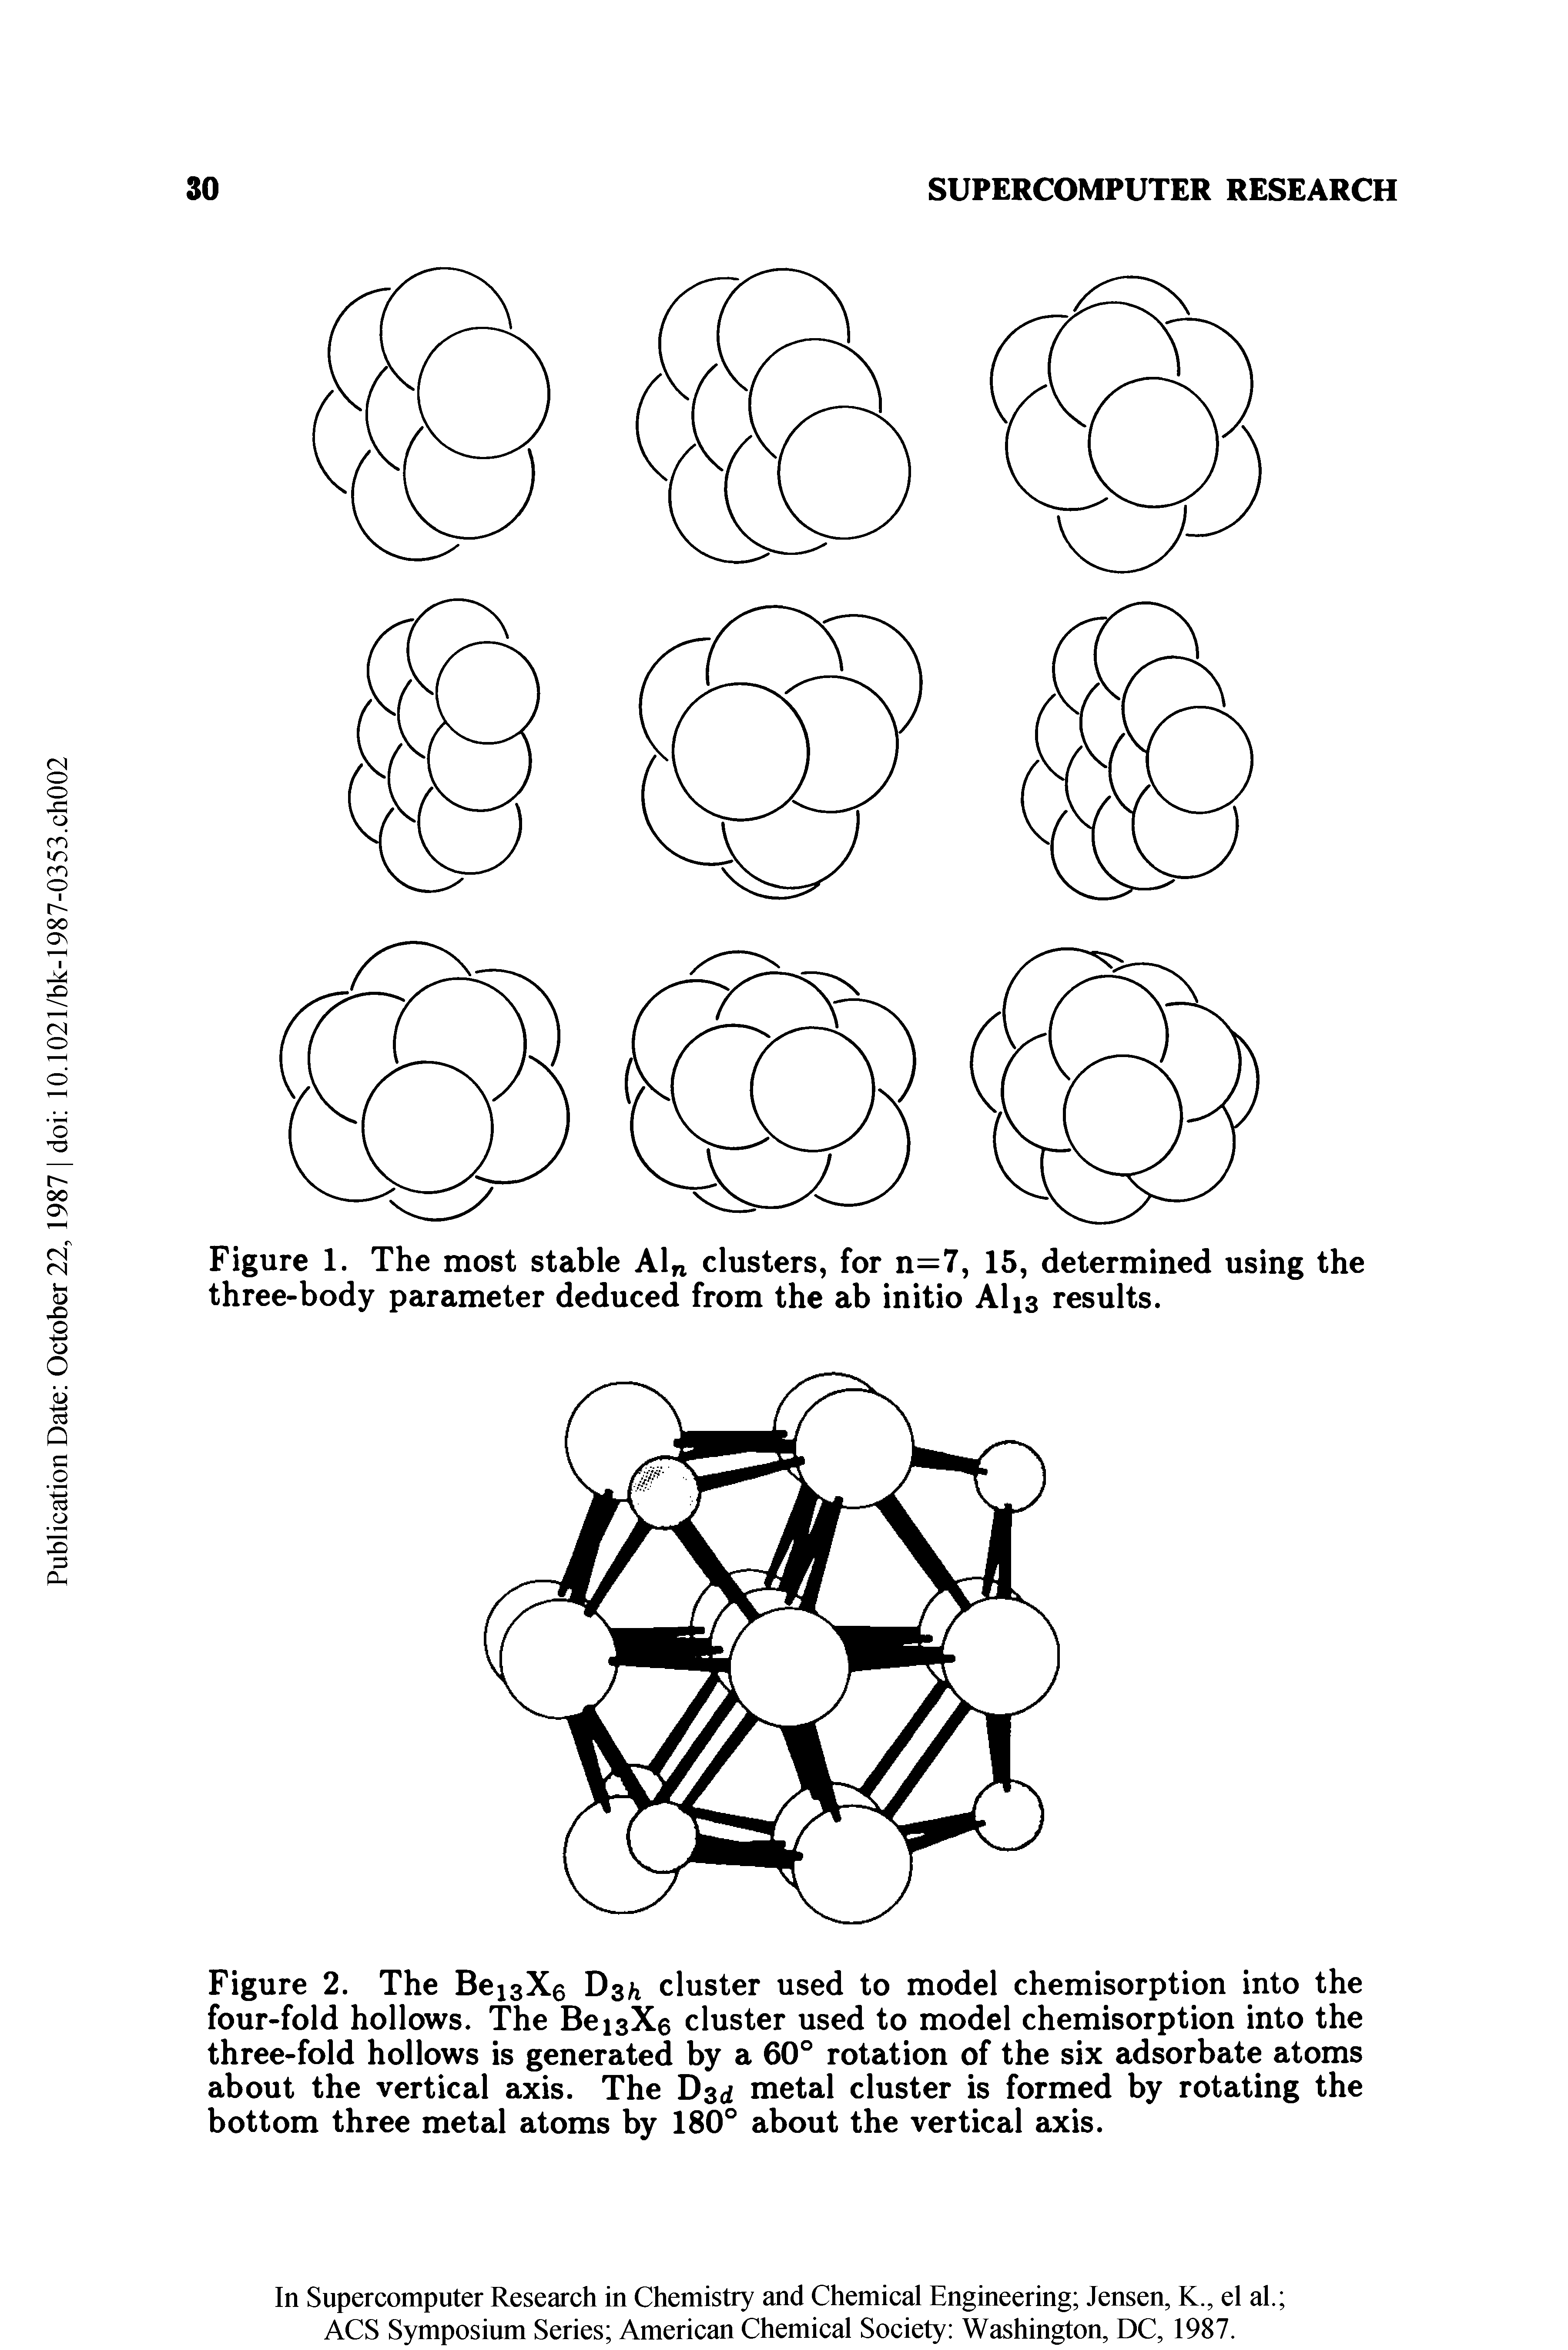 Figure 2. The BeisXe D3/1 cluster used to model chemisorption into the four-fold hollows. The Be 13X3 cluster used to model chemisorption into the three-fold hollows is generated by a 60° rotation of the six adsorbate atoms about the vertical axis. The D3d metal cluster is formed by rotating the bottom three metal atoms by 180° about the vertical axis.